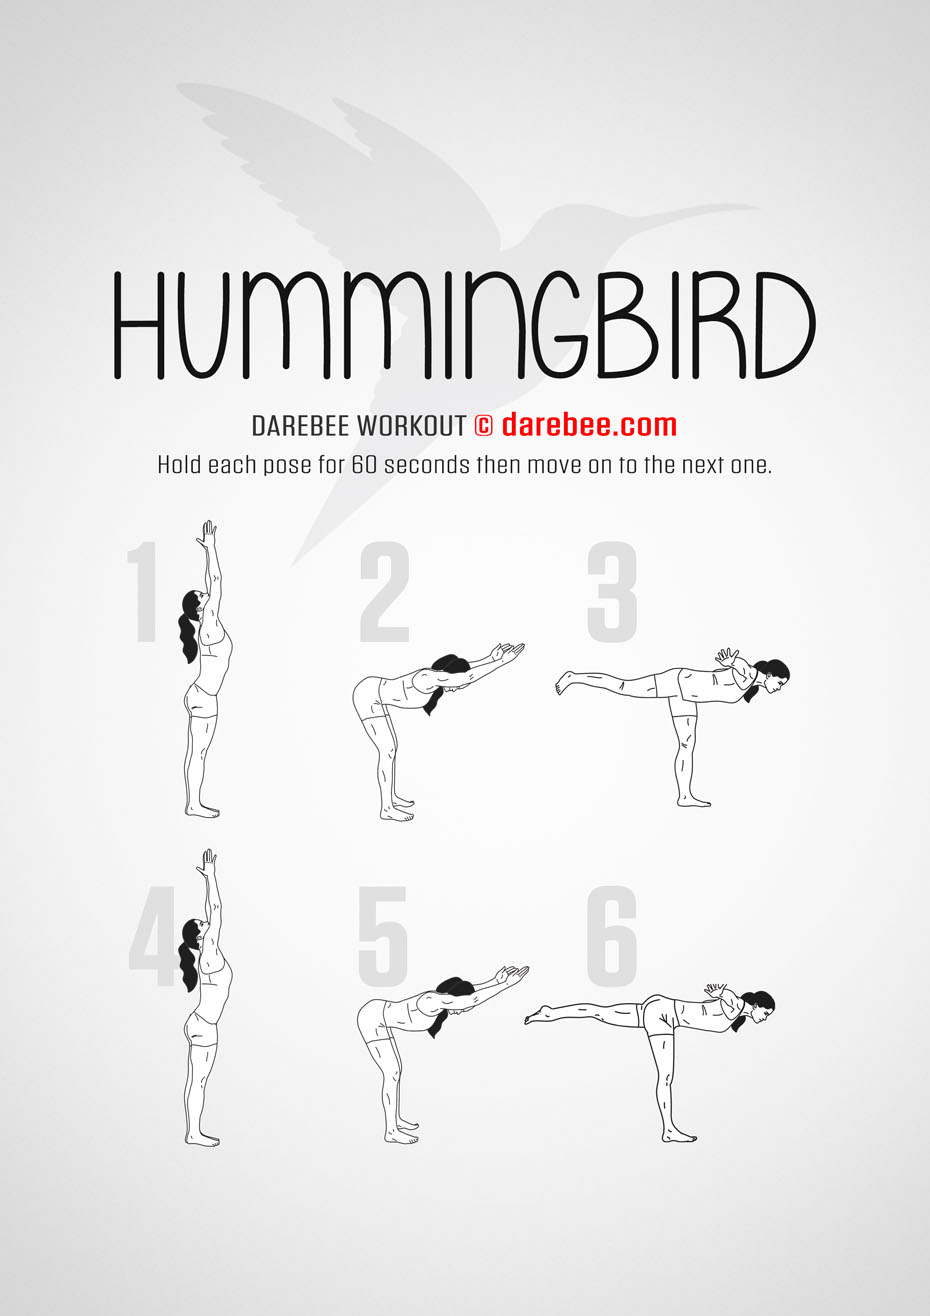 Hummingbird is a DAREBEE home fitness no-equipment yoga-based lower body strength and core stability workout that helps you get fitter without exhausting you.